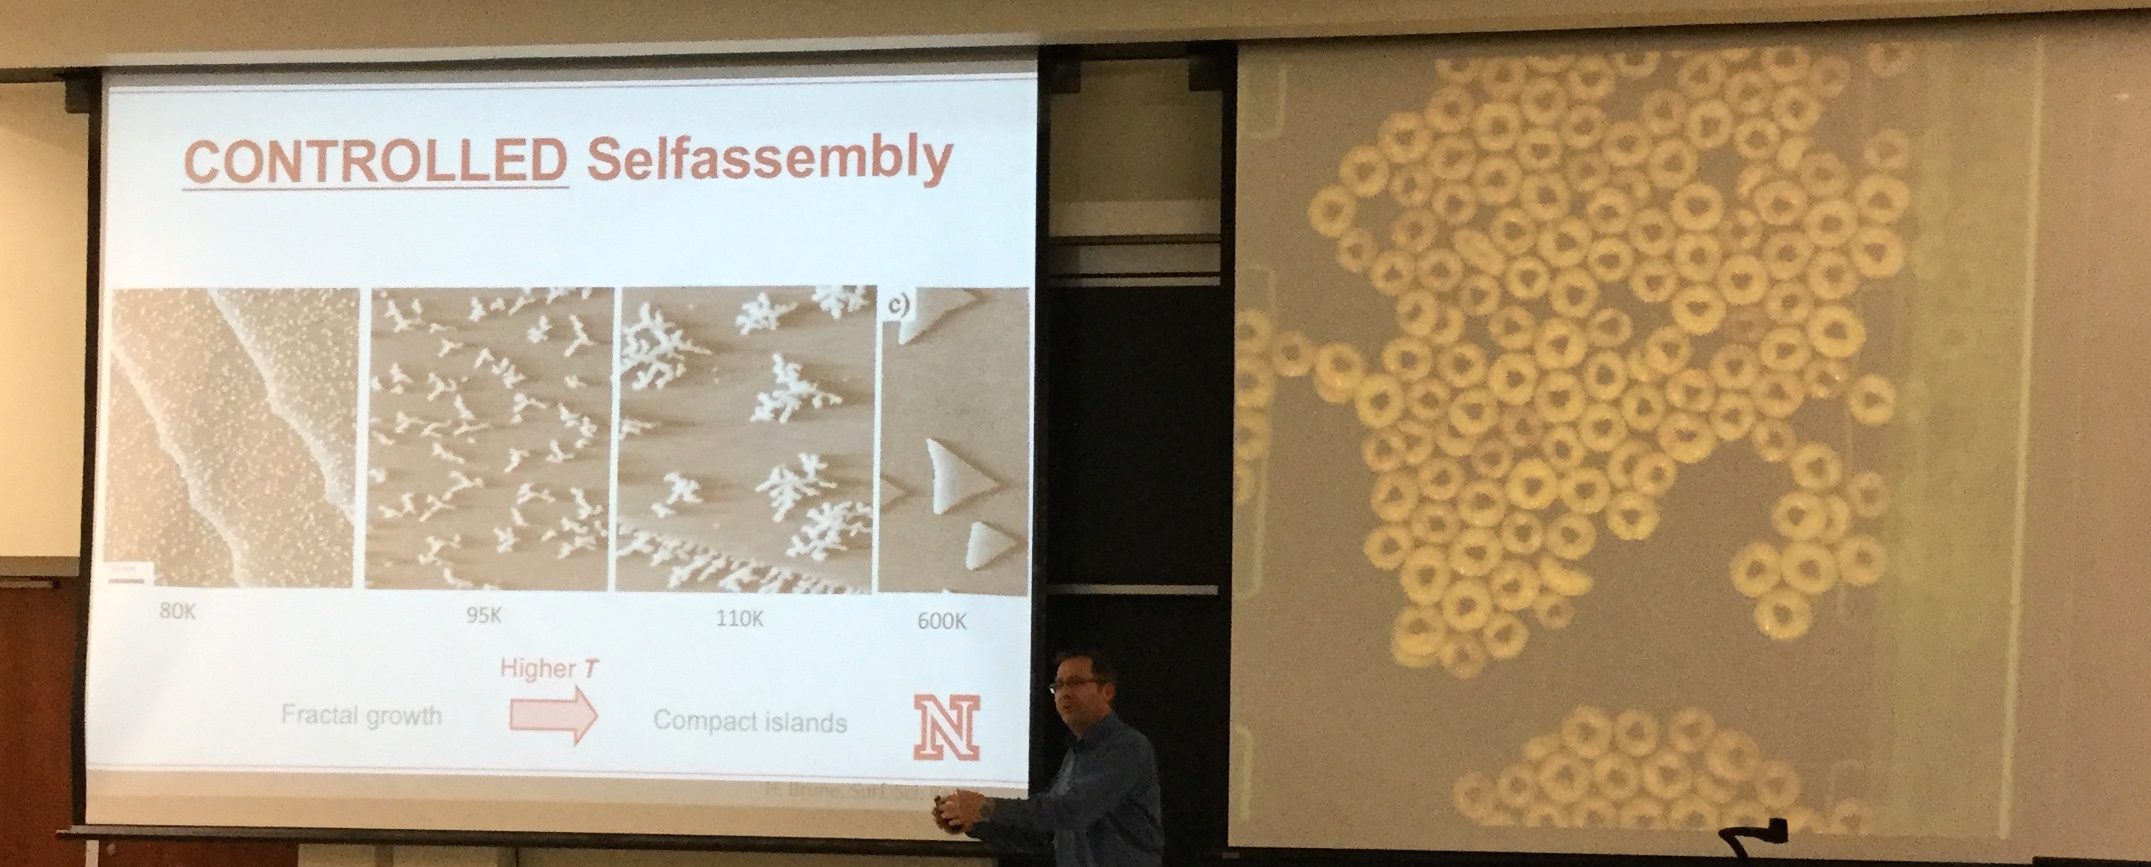 Fig. 4 Dr. Enders demonstrates self-assembly in Cheerios (right) while presenting scanning tunneling microscopy (STM) images showing the self-assembly of silver atoms on a platinum substrate at various temperatures (left). (Click to enlarge.)